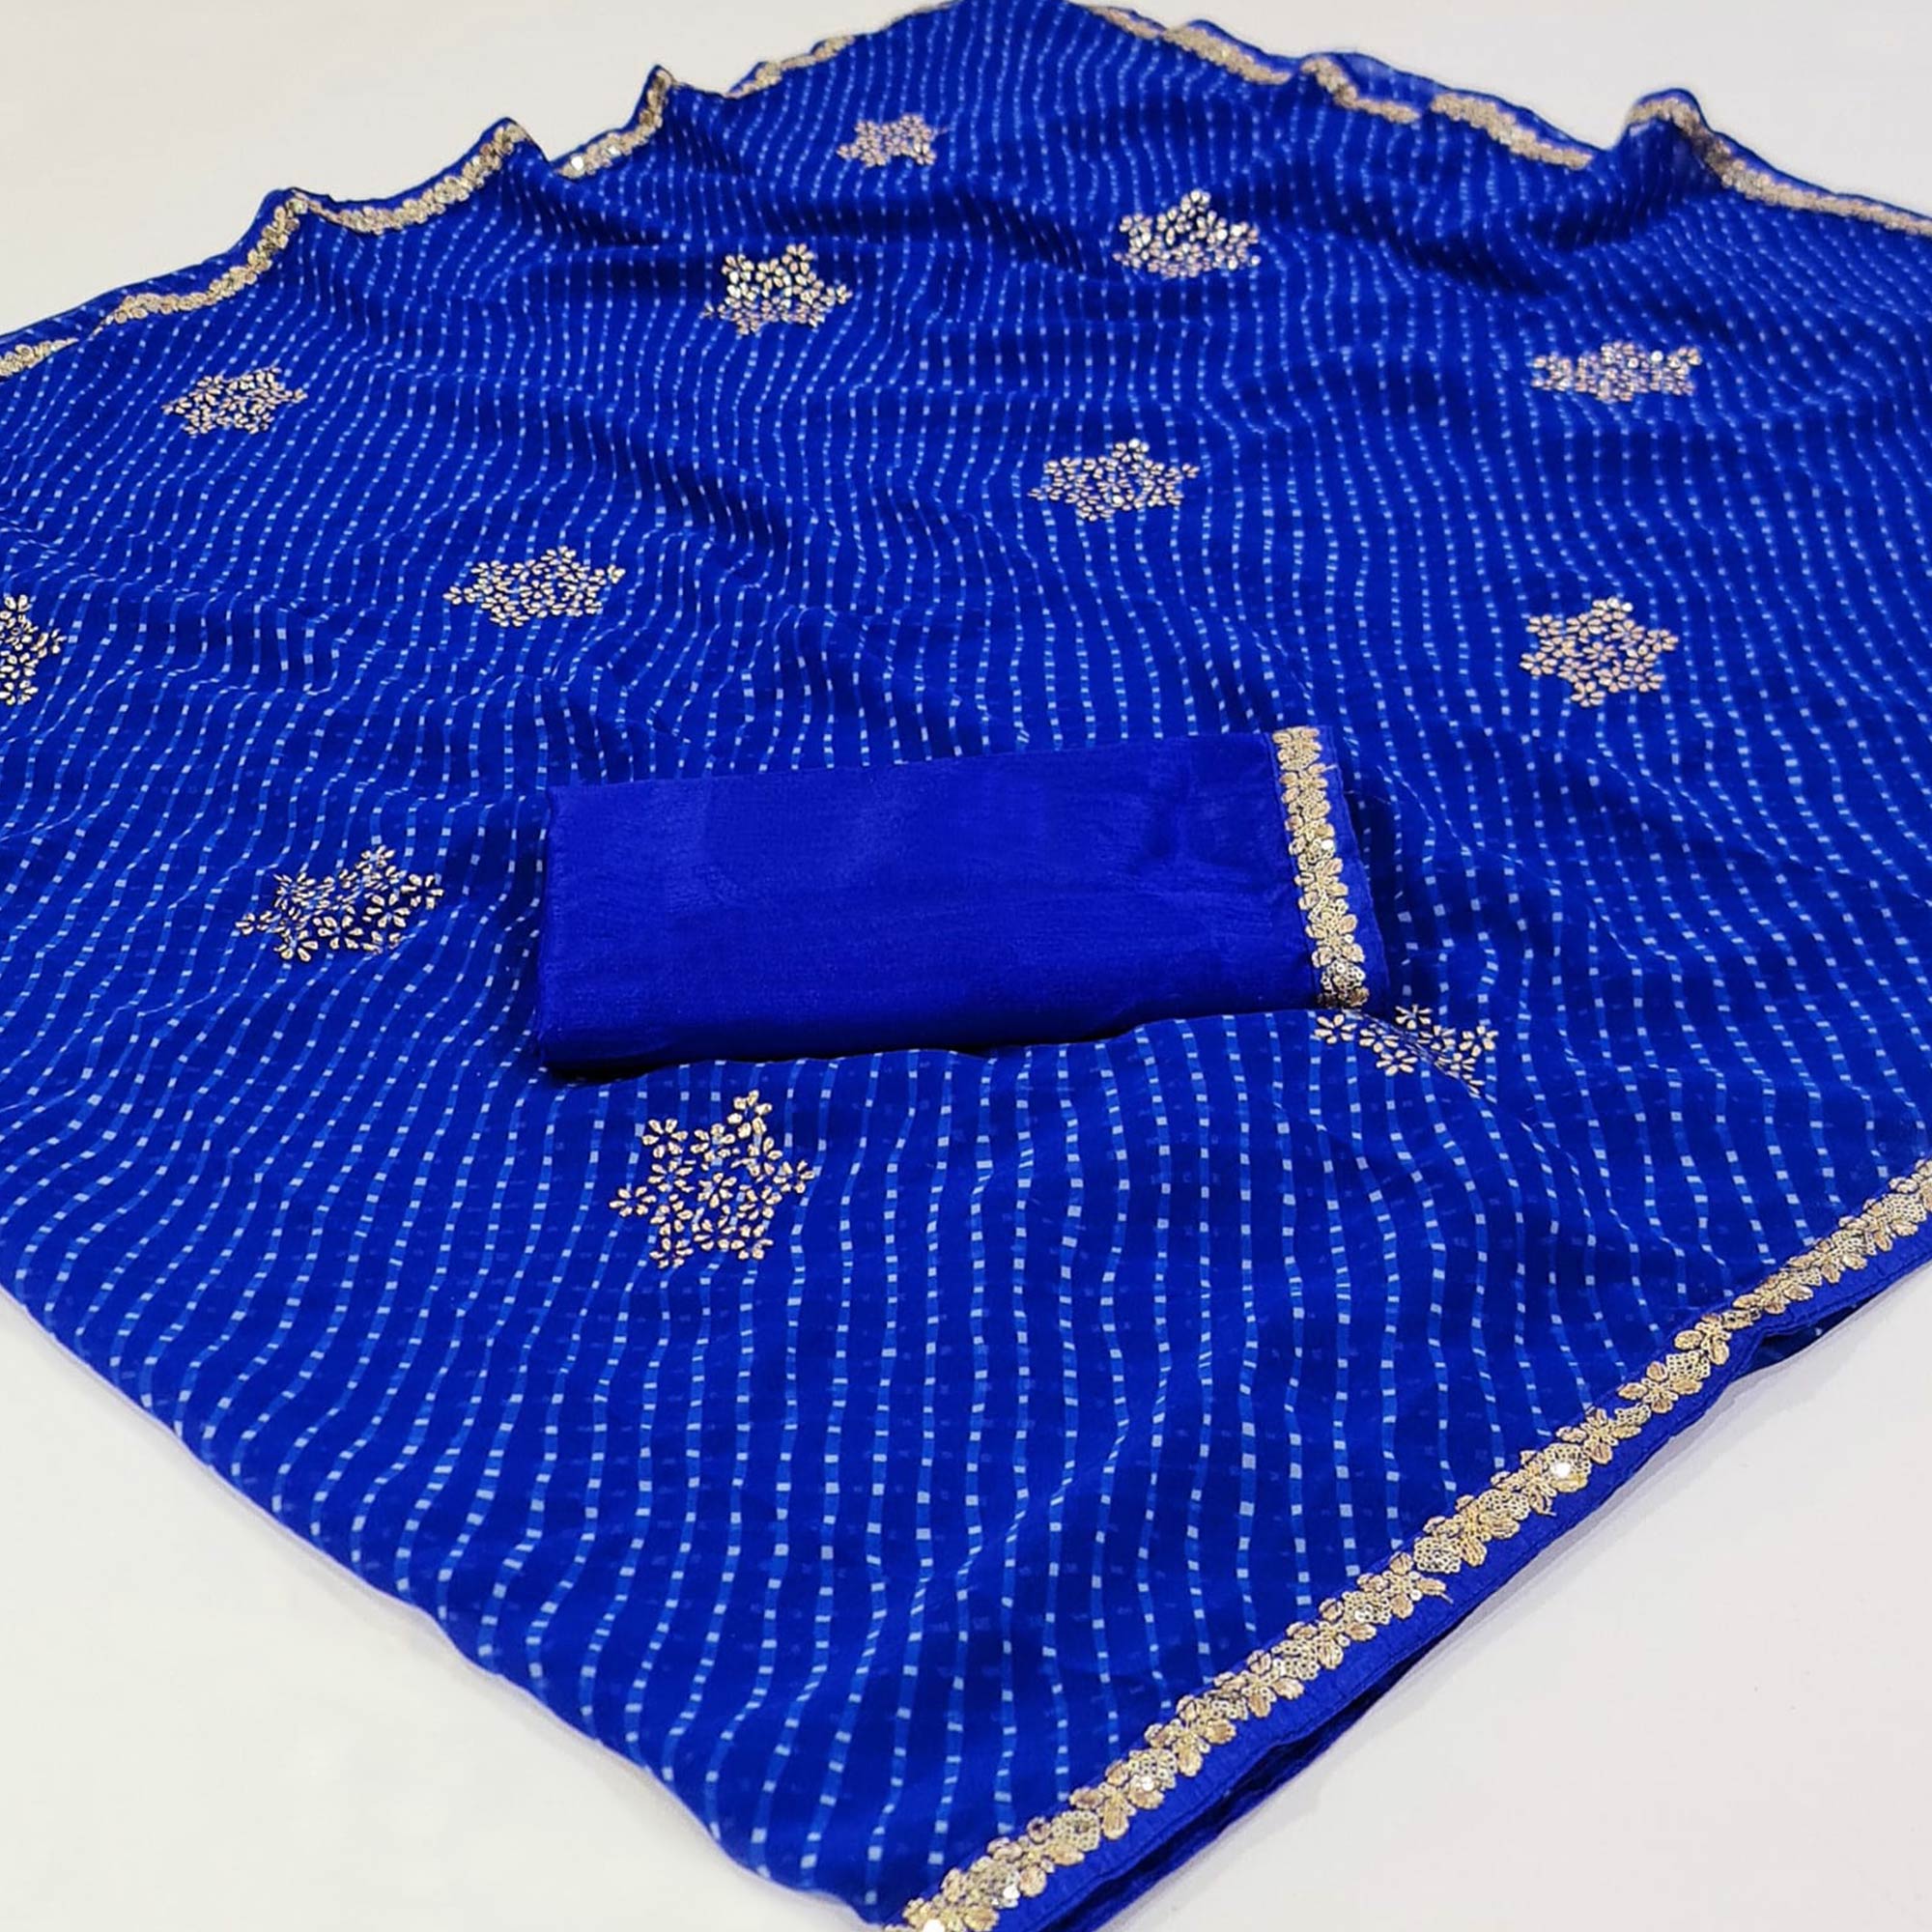 Blue Printed Georgette Saree With lace Border